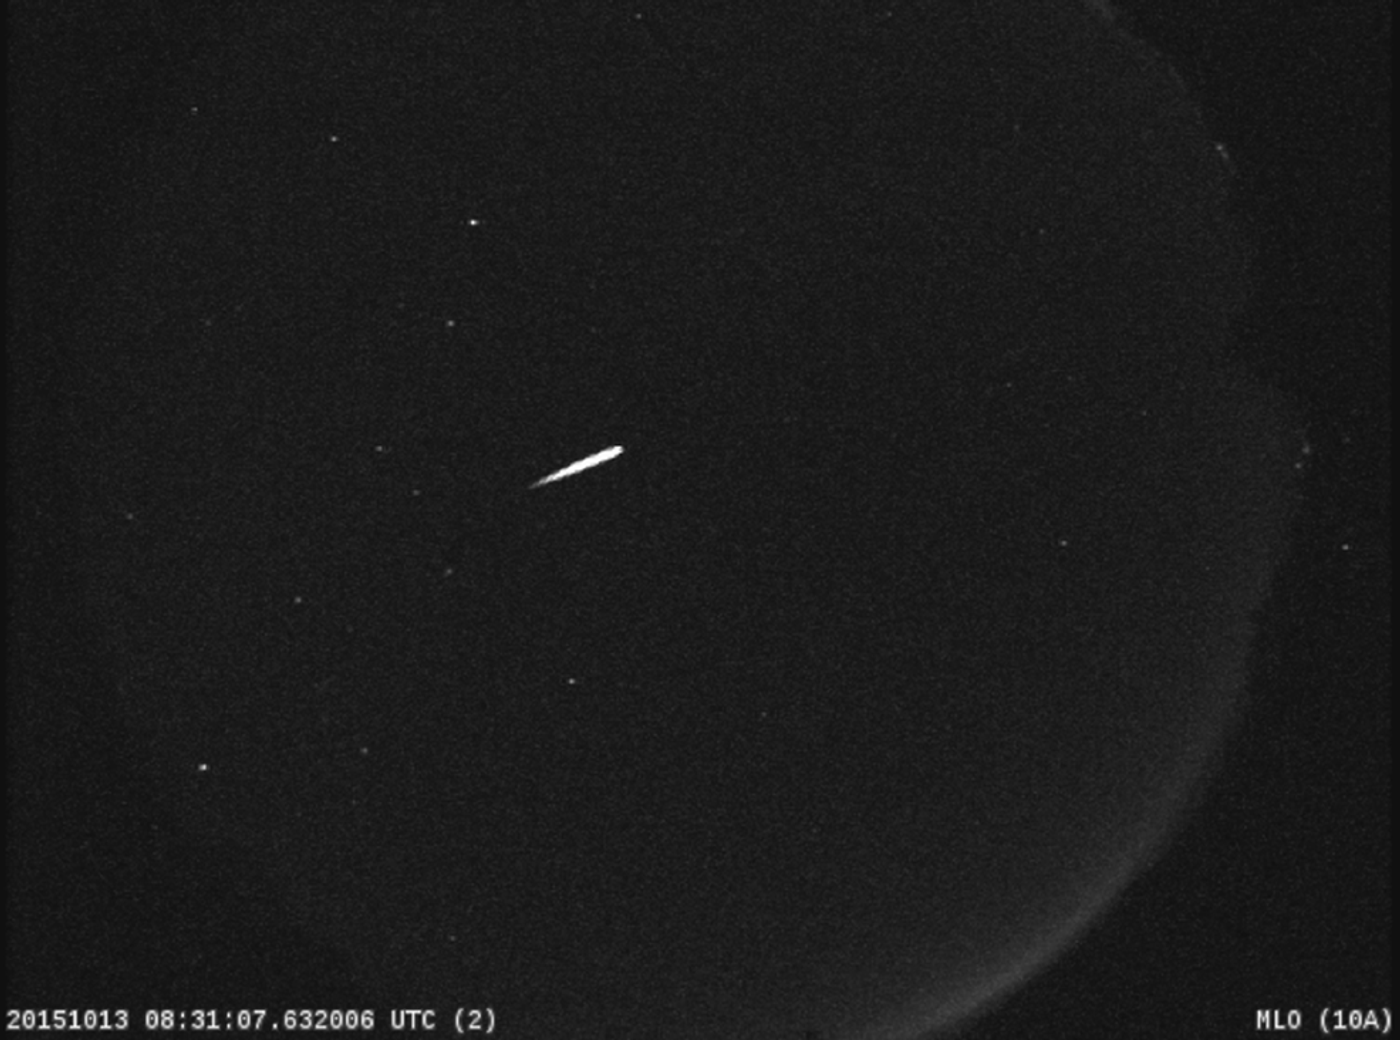 A shooting star from the famous Orionoid Meteor Shower.